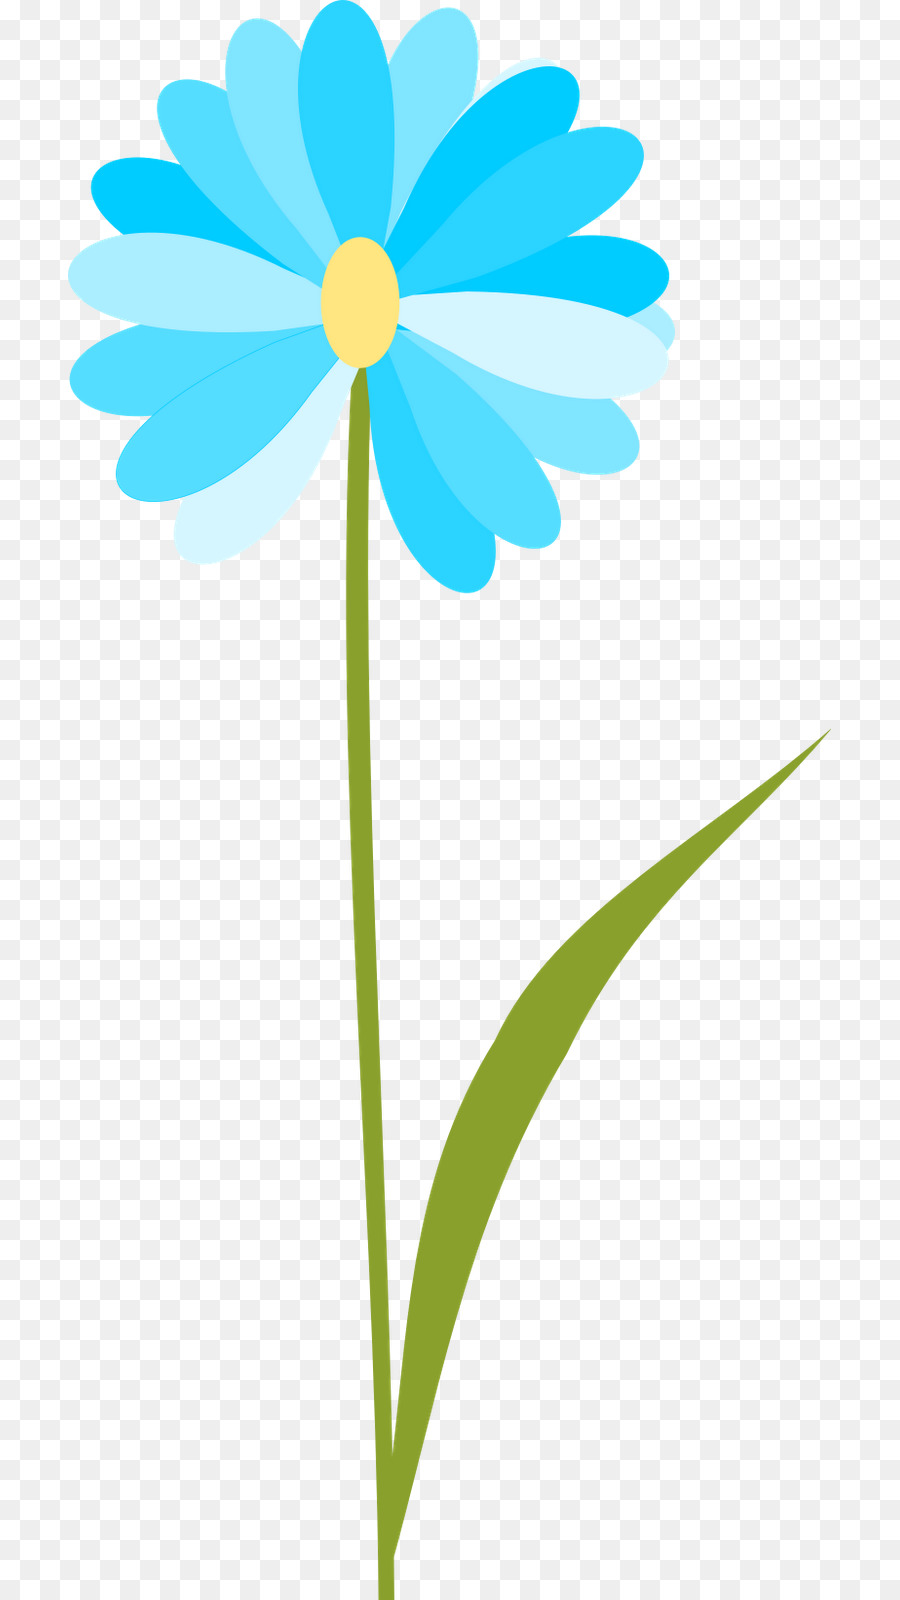 Free Free Flower Clipart Transparent Background, Download Free Free Flower  Clipart Transparent Background png images, Free ClipArts on Clipart Library